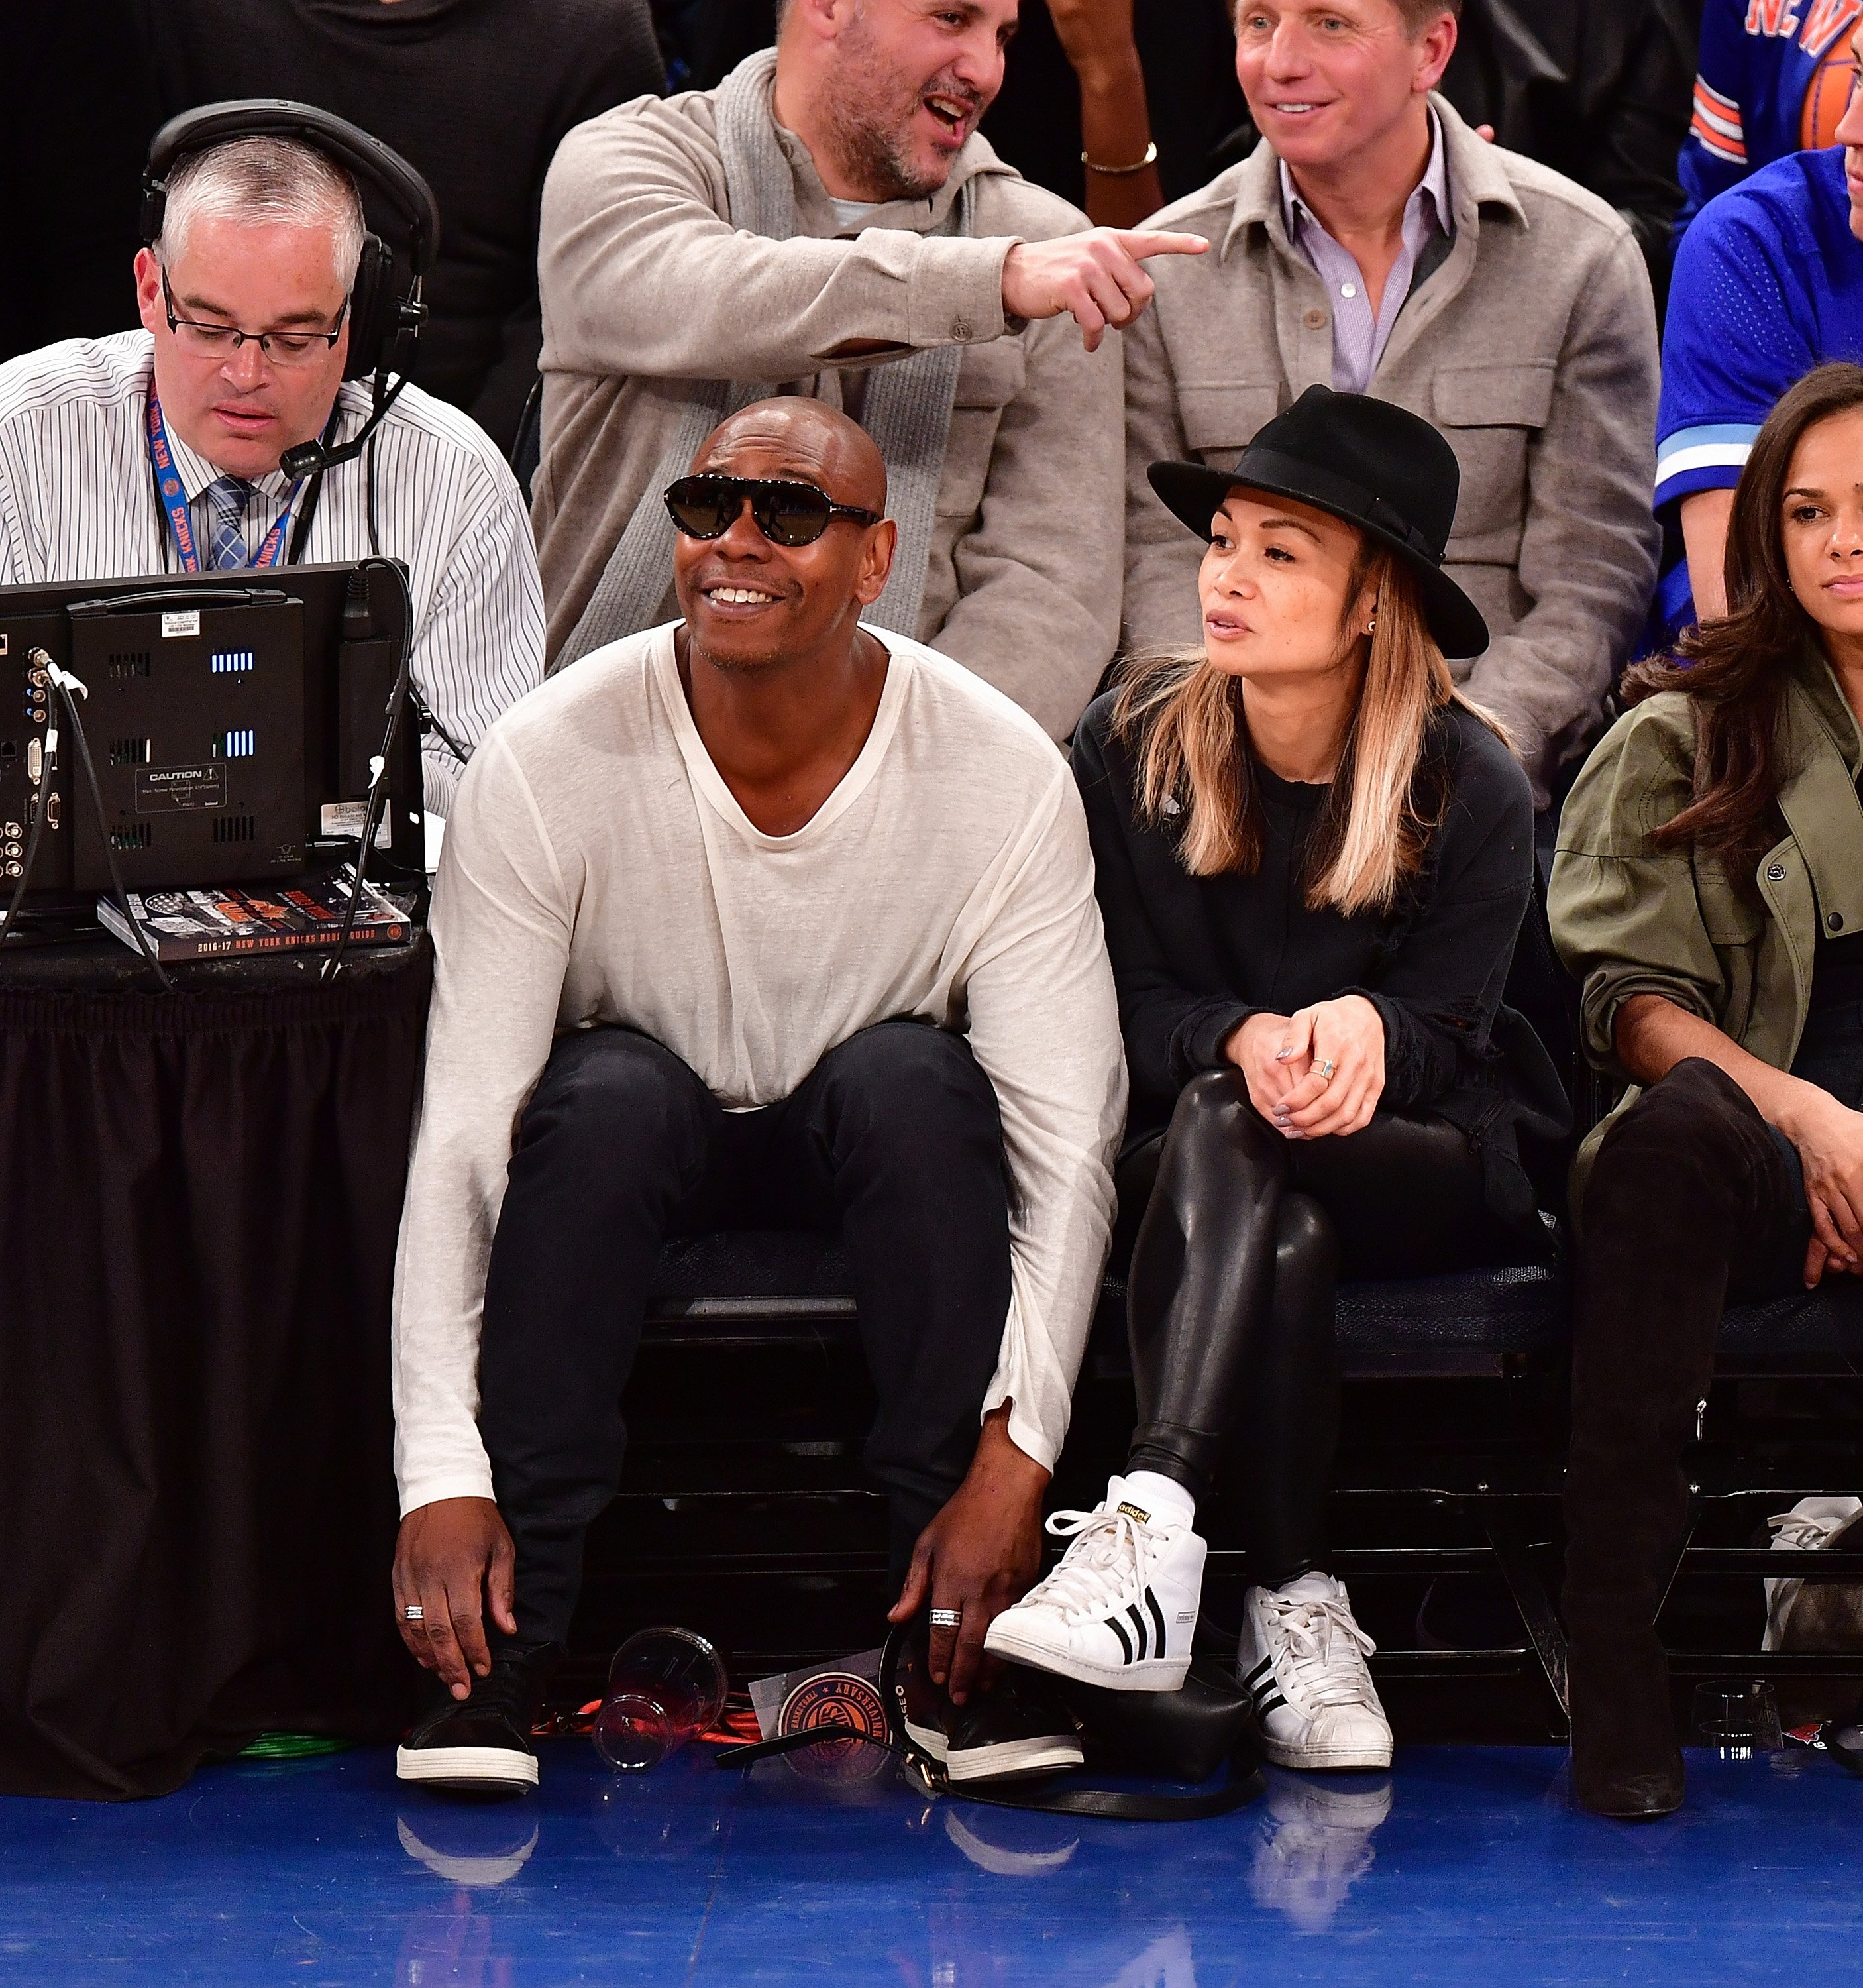 Dave and Elaine Chappelle at a basketball game in New York City |  Source: Getty Images 